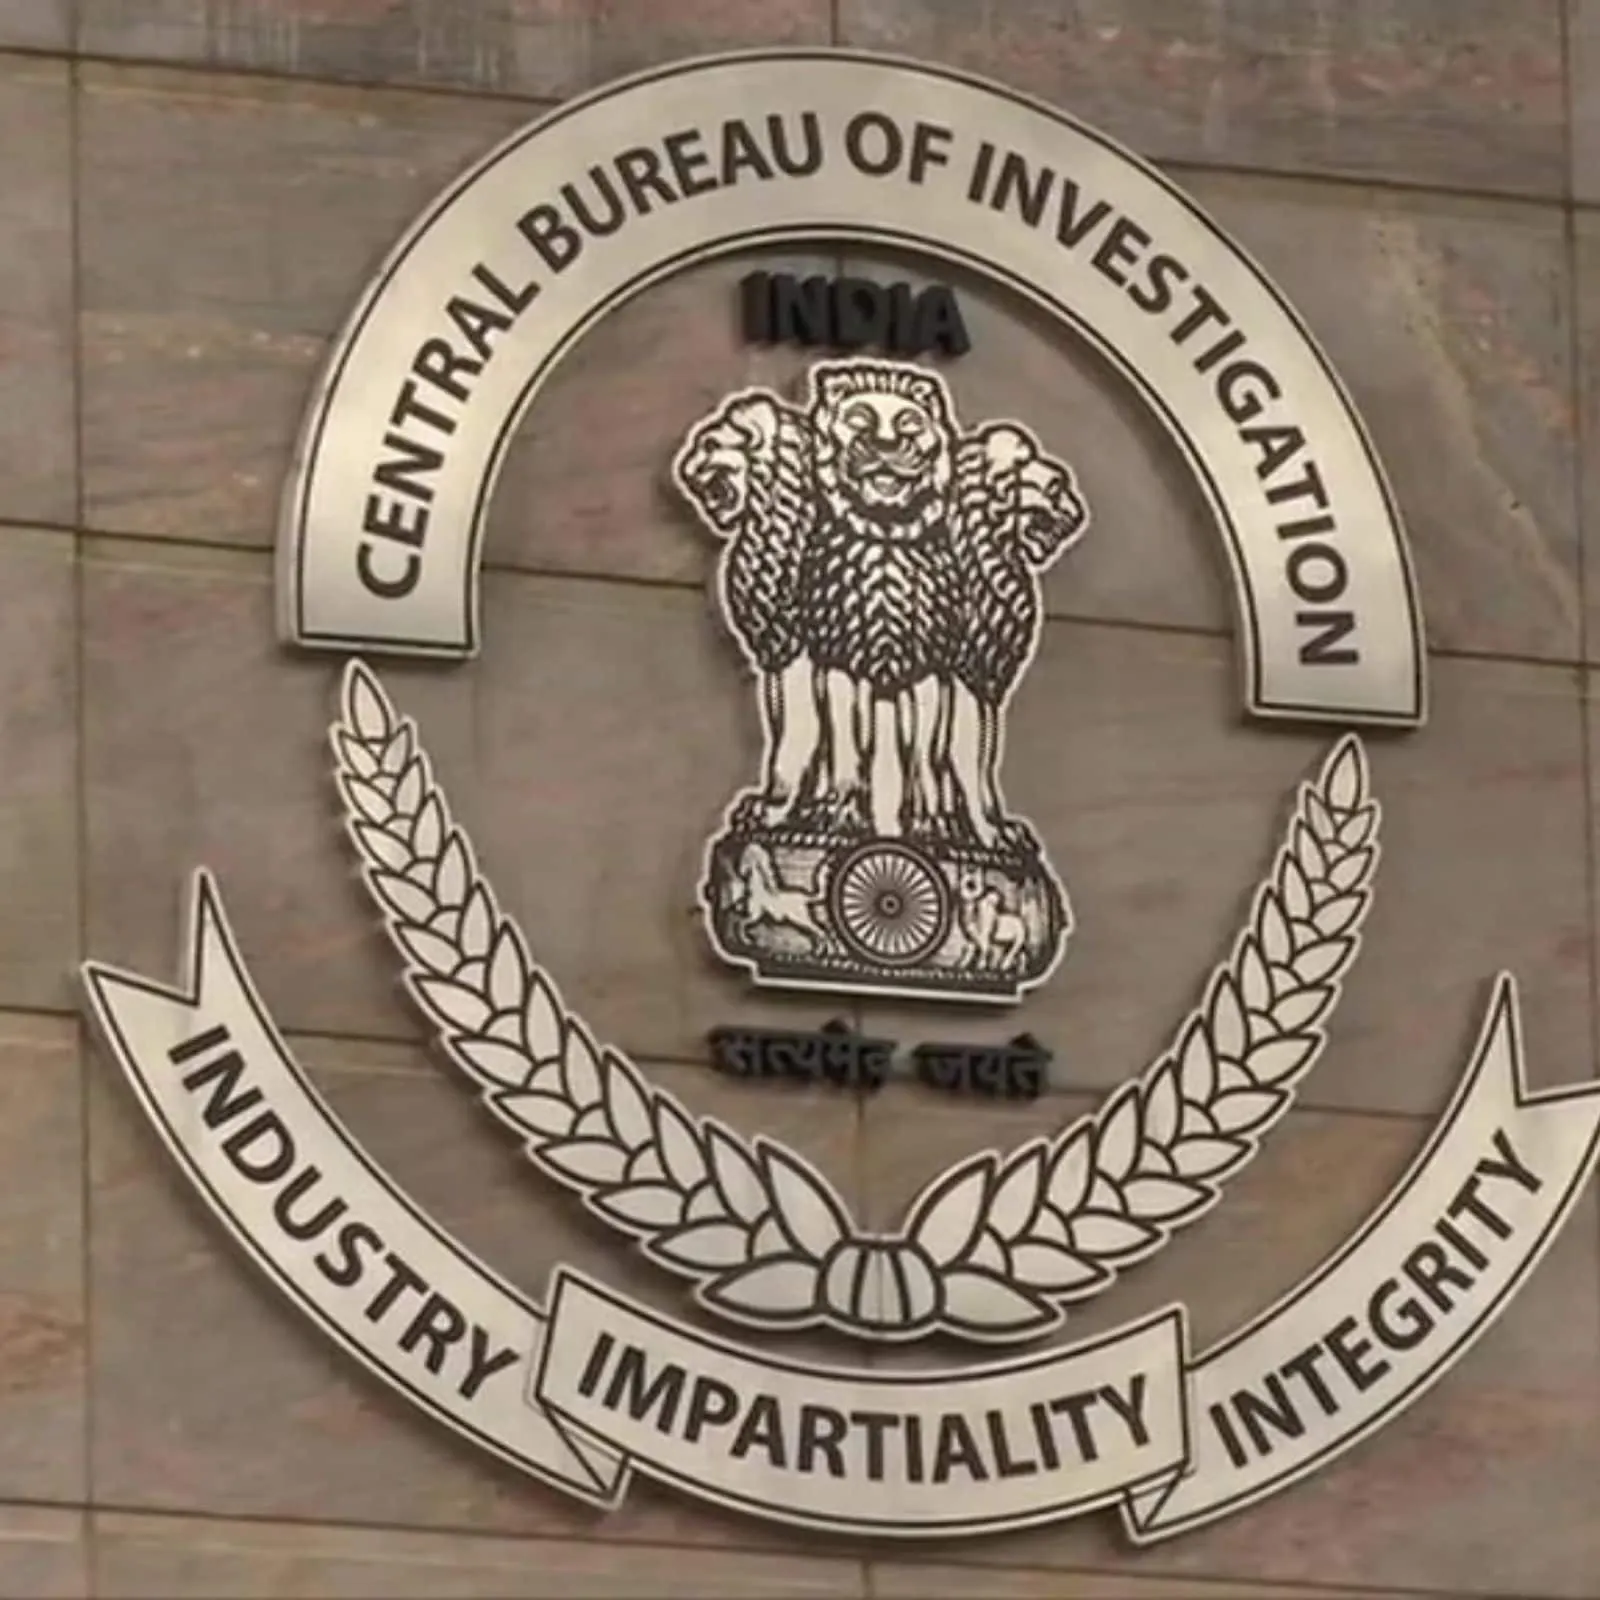 CBI Challenges RTI Disclosure: Balancing Transparency and Secrecy